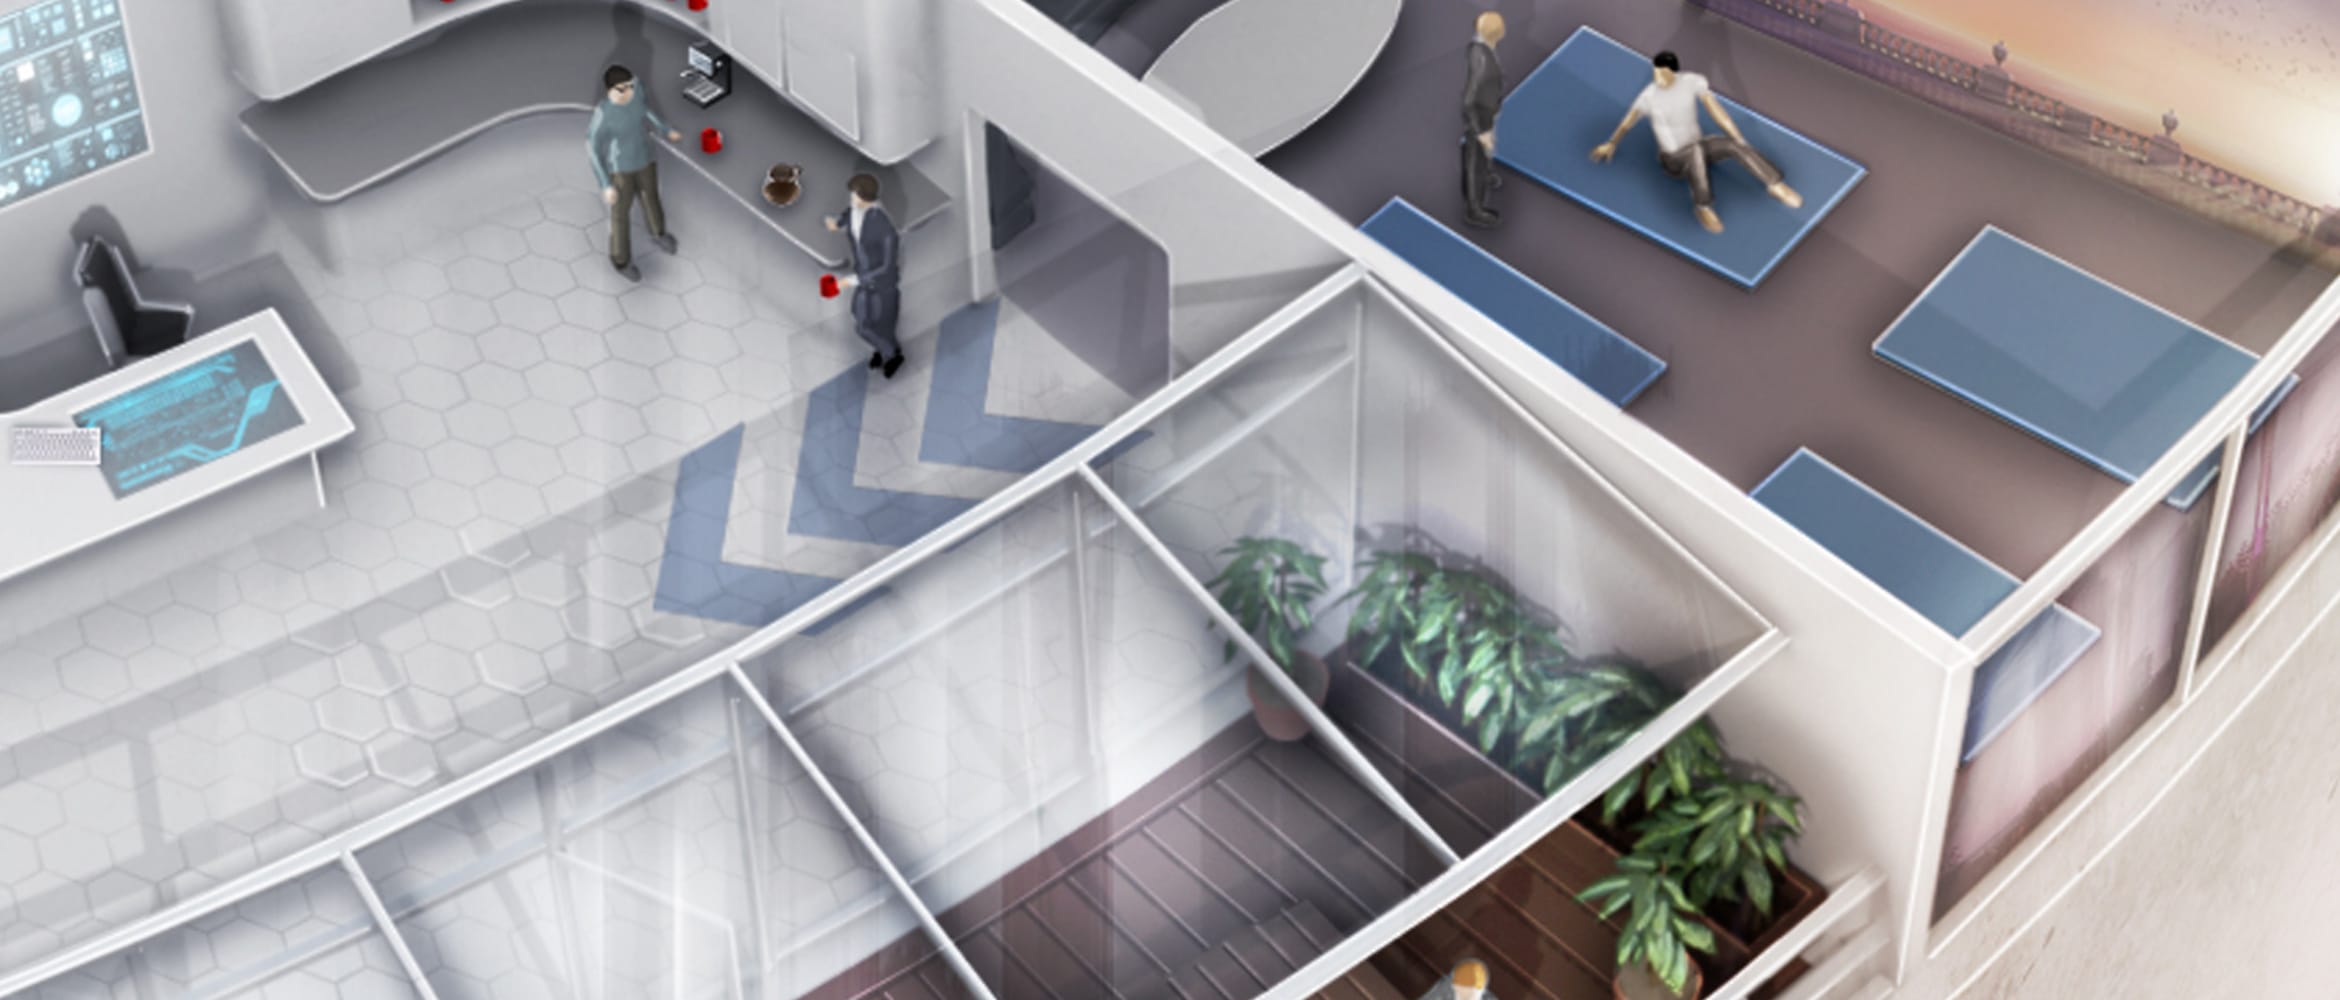 Illustration of the future of the office designed for human interaction